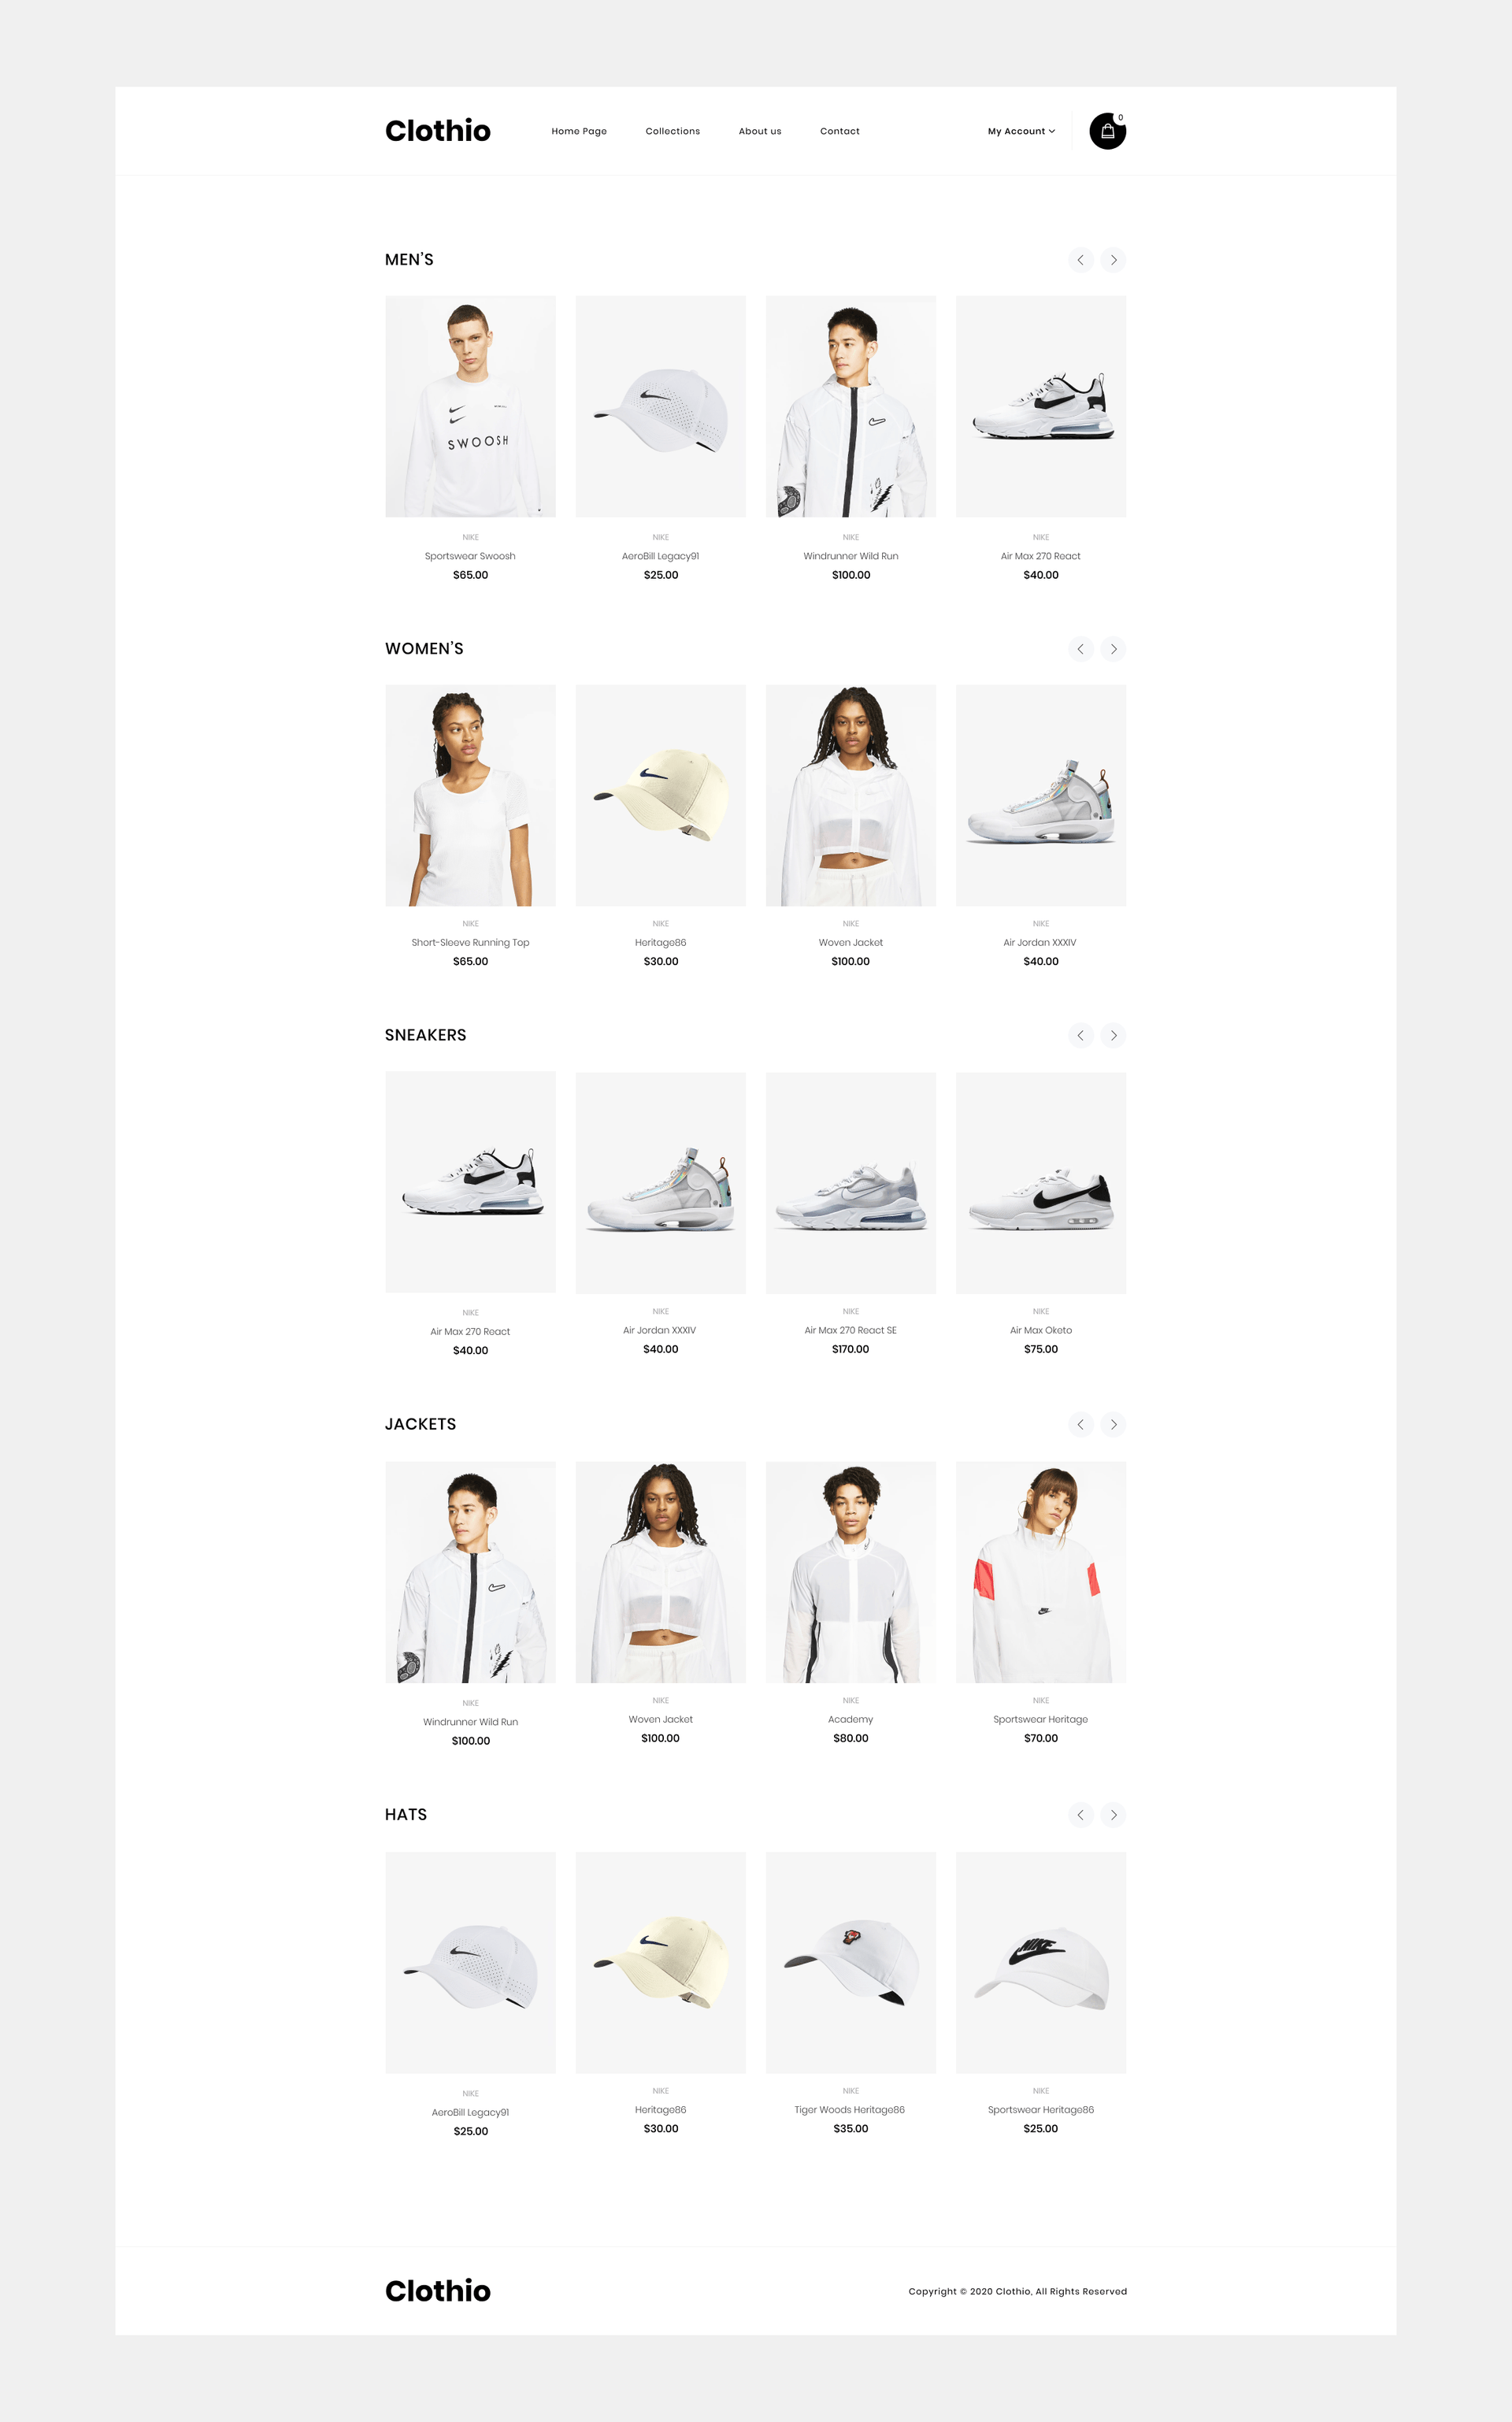 Collections Page